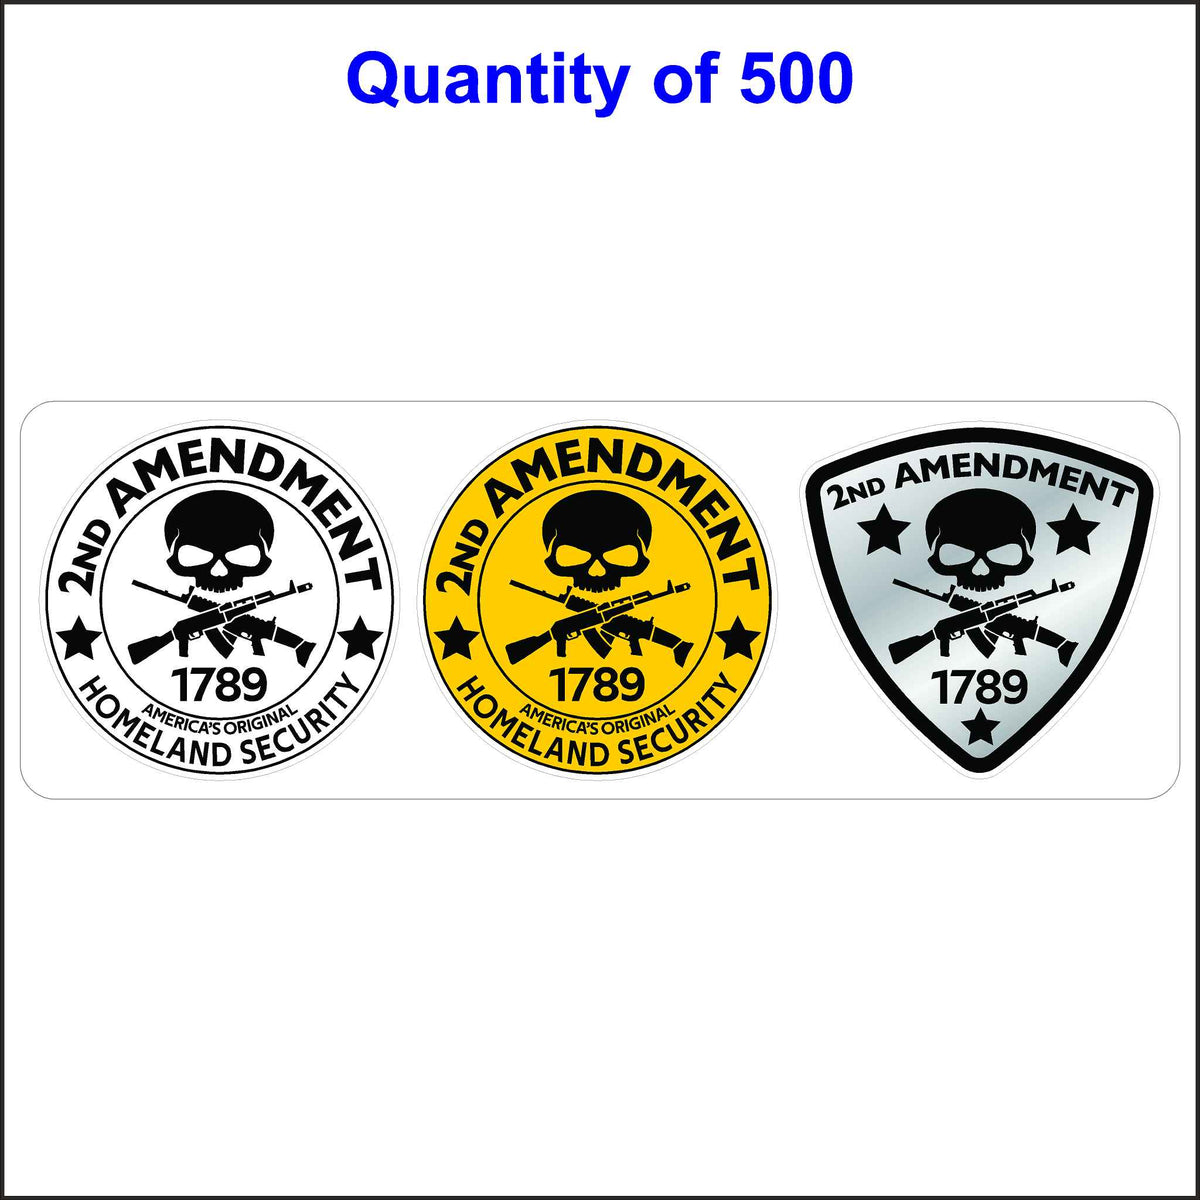 Second Amendment Sticker With Skulls 3 Pack. 3 Different 2nd Amendment Stickers One of Each in White, Yellow and Gray All With Black Letters. Quantity of 500, 3 packs.